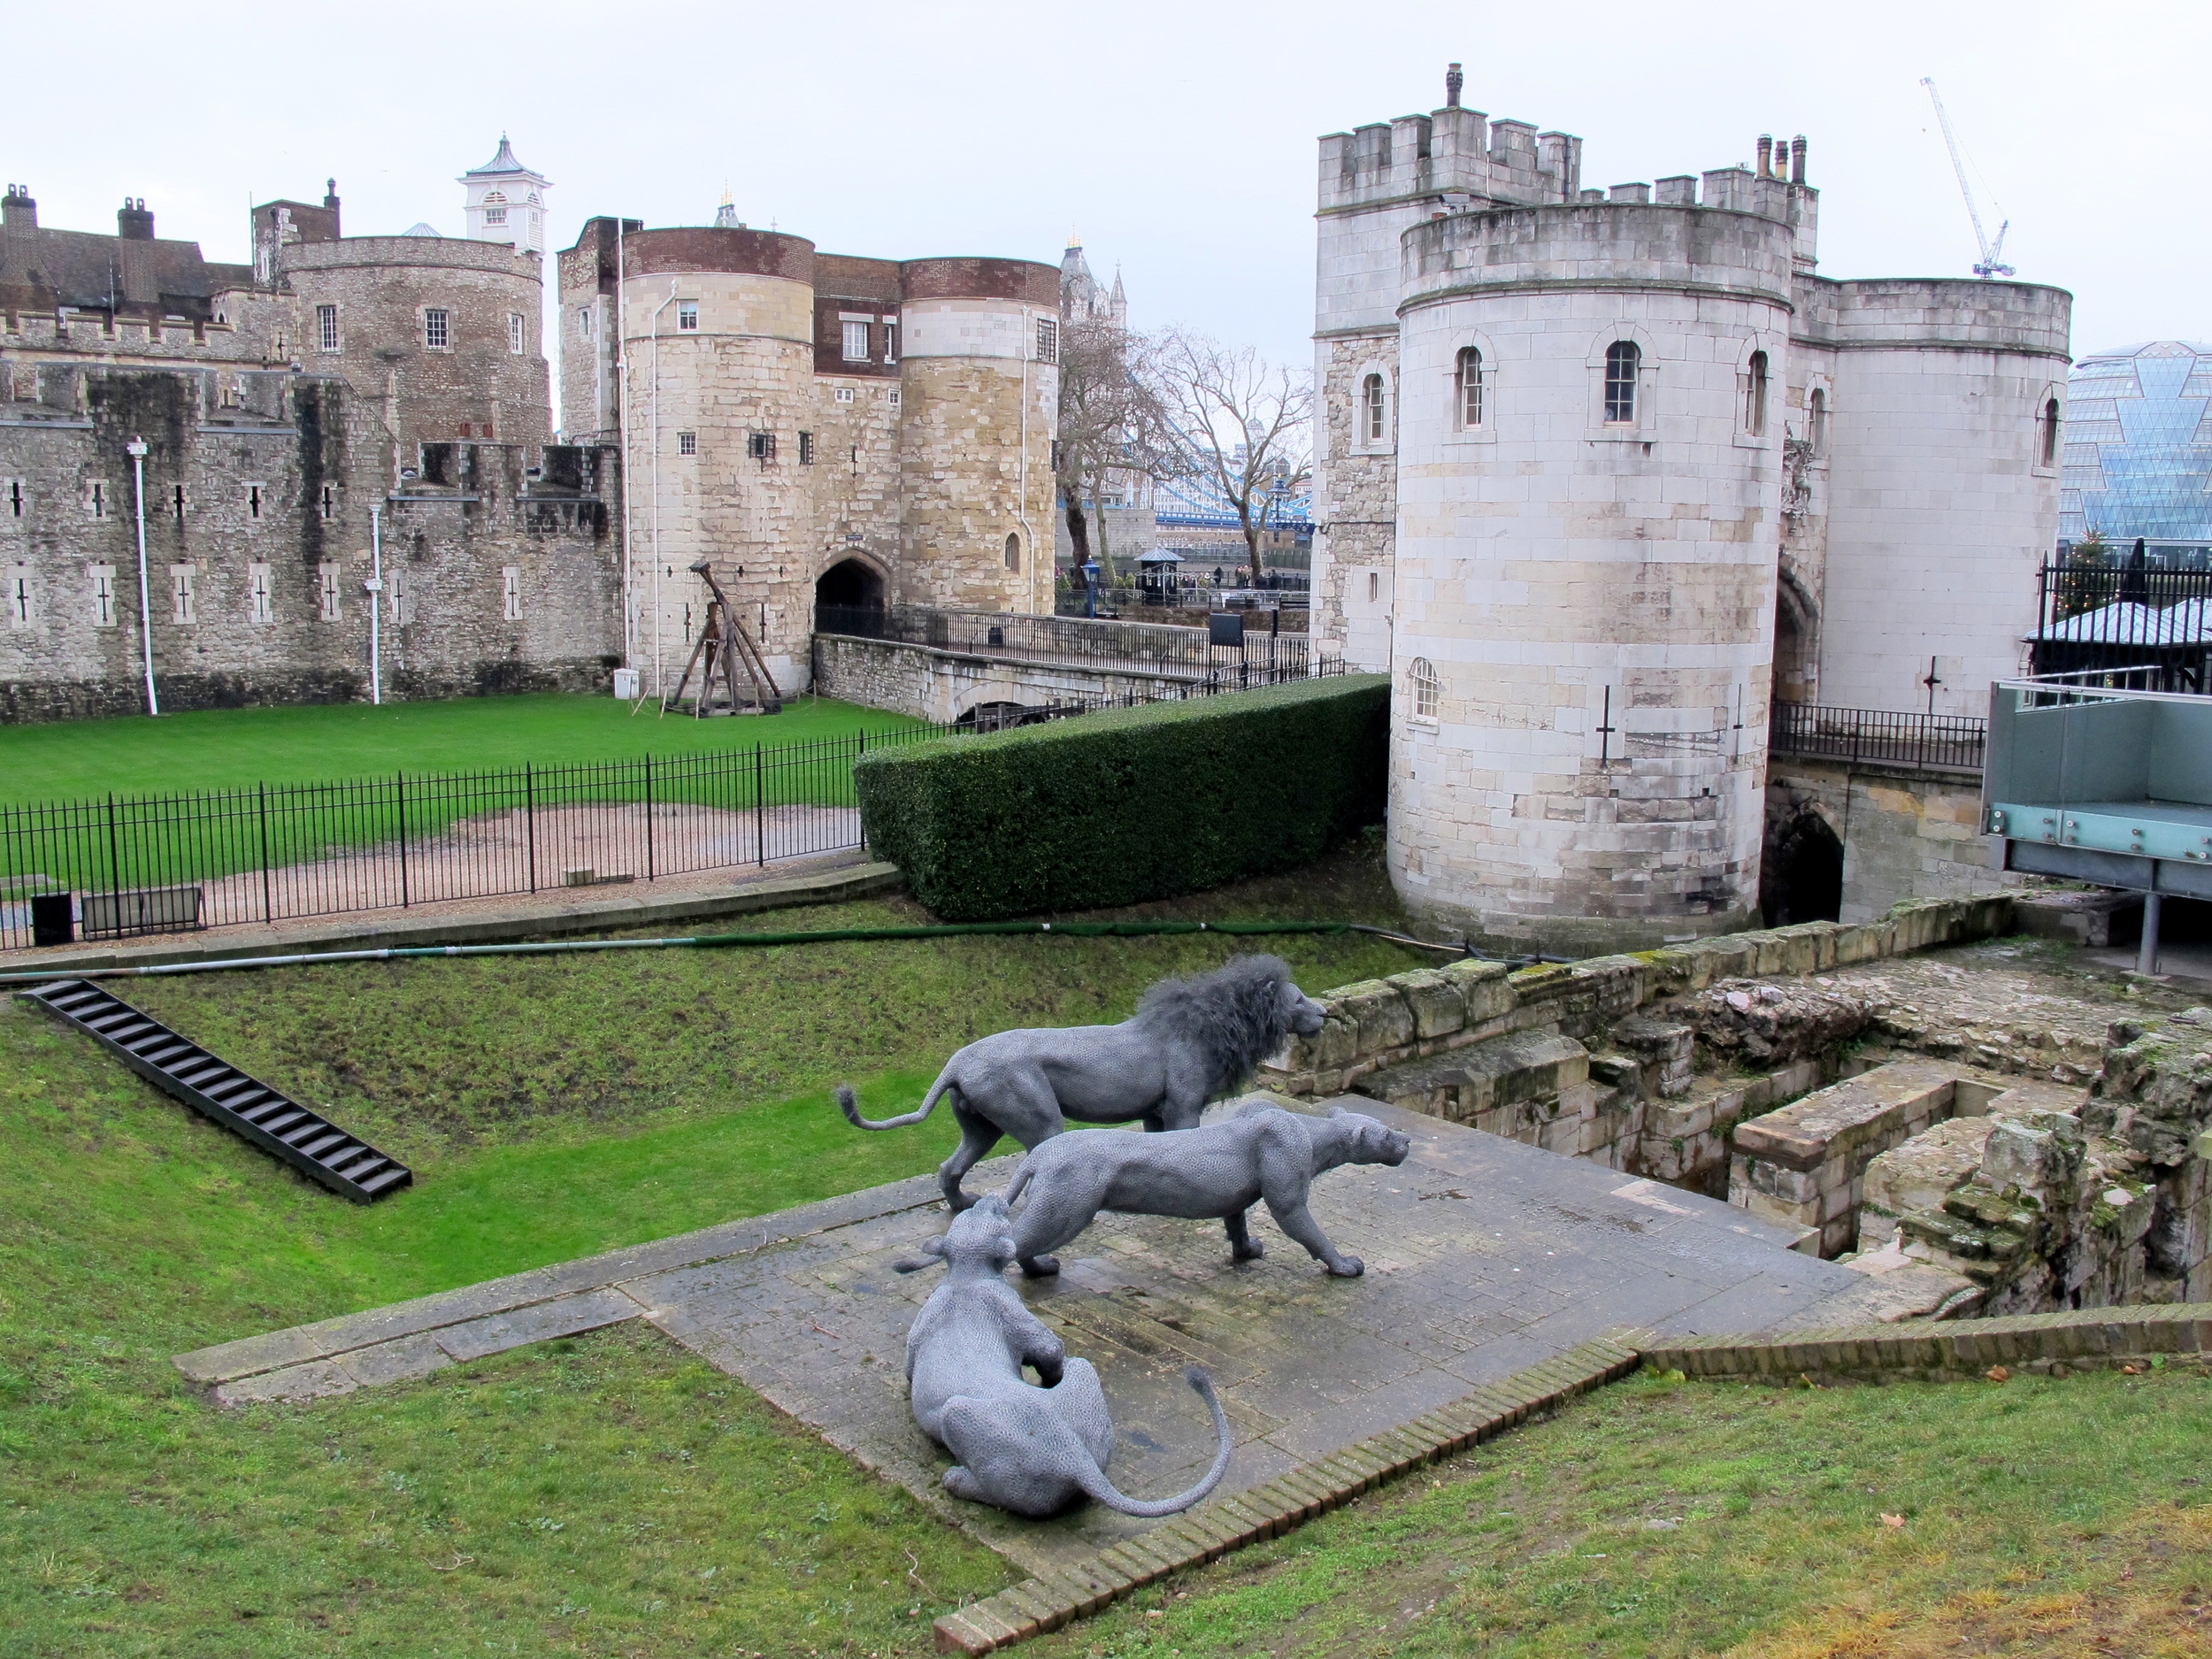 Menagerie at Tower of London